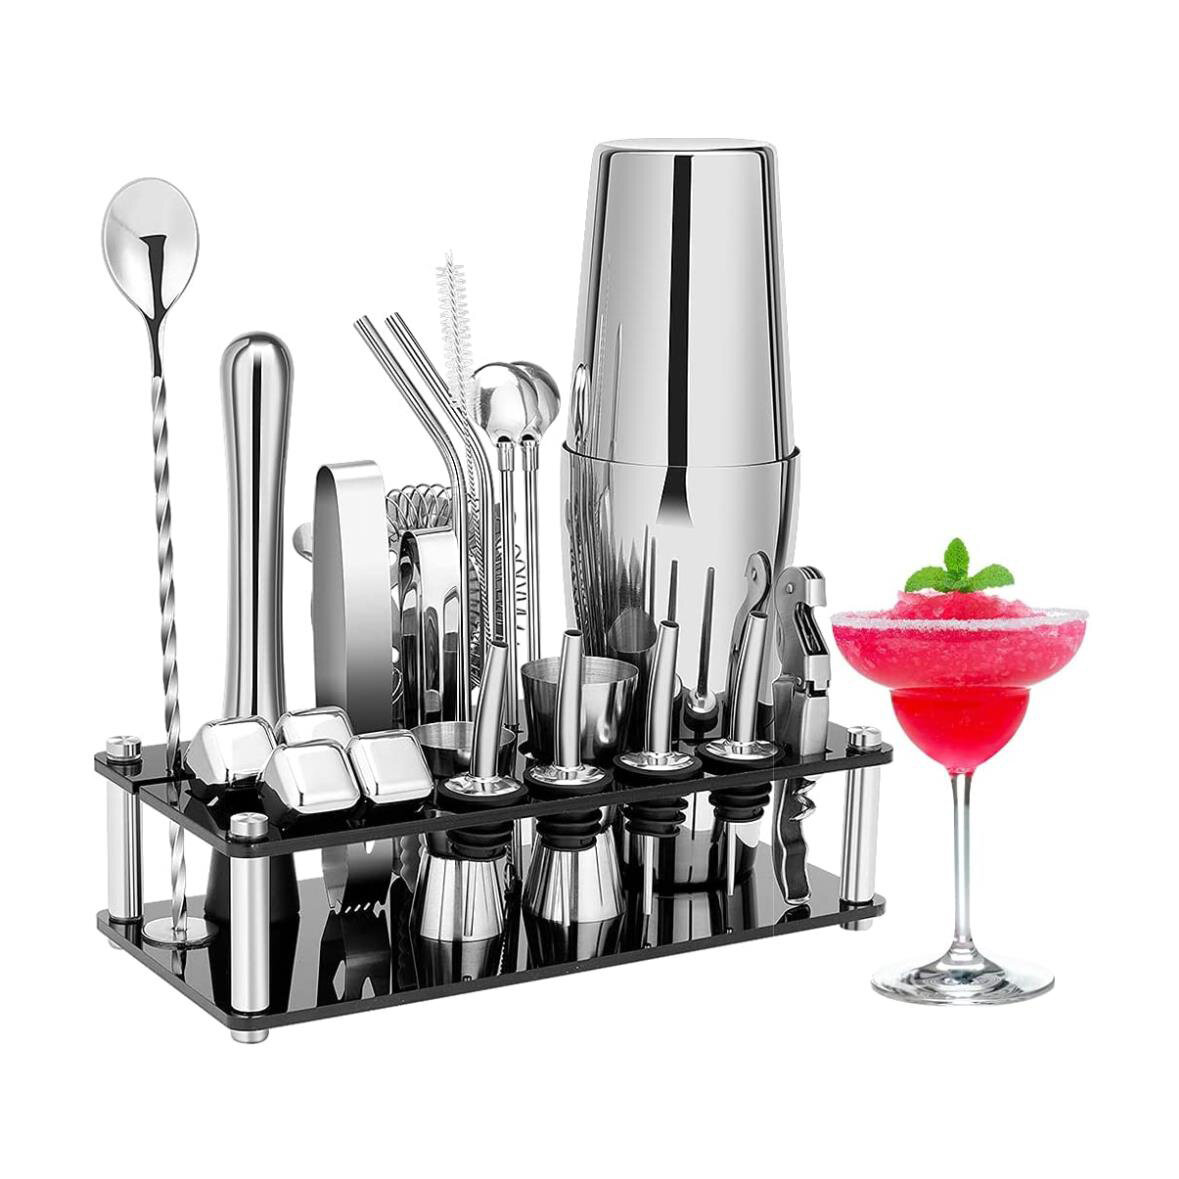 Professional Home Bar Tools for an Awesome Drink Mixing Experience 19 Pcs Stainless Steel Cocktail Shaker Set Boston Bartender Kit with Revolving Stand